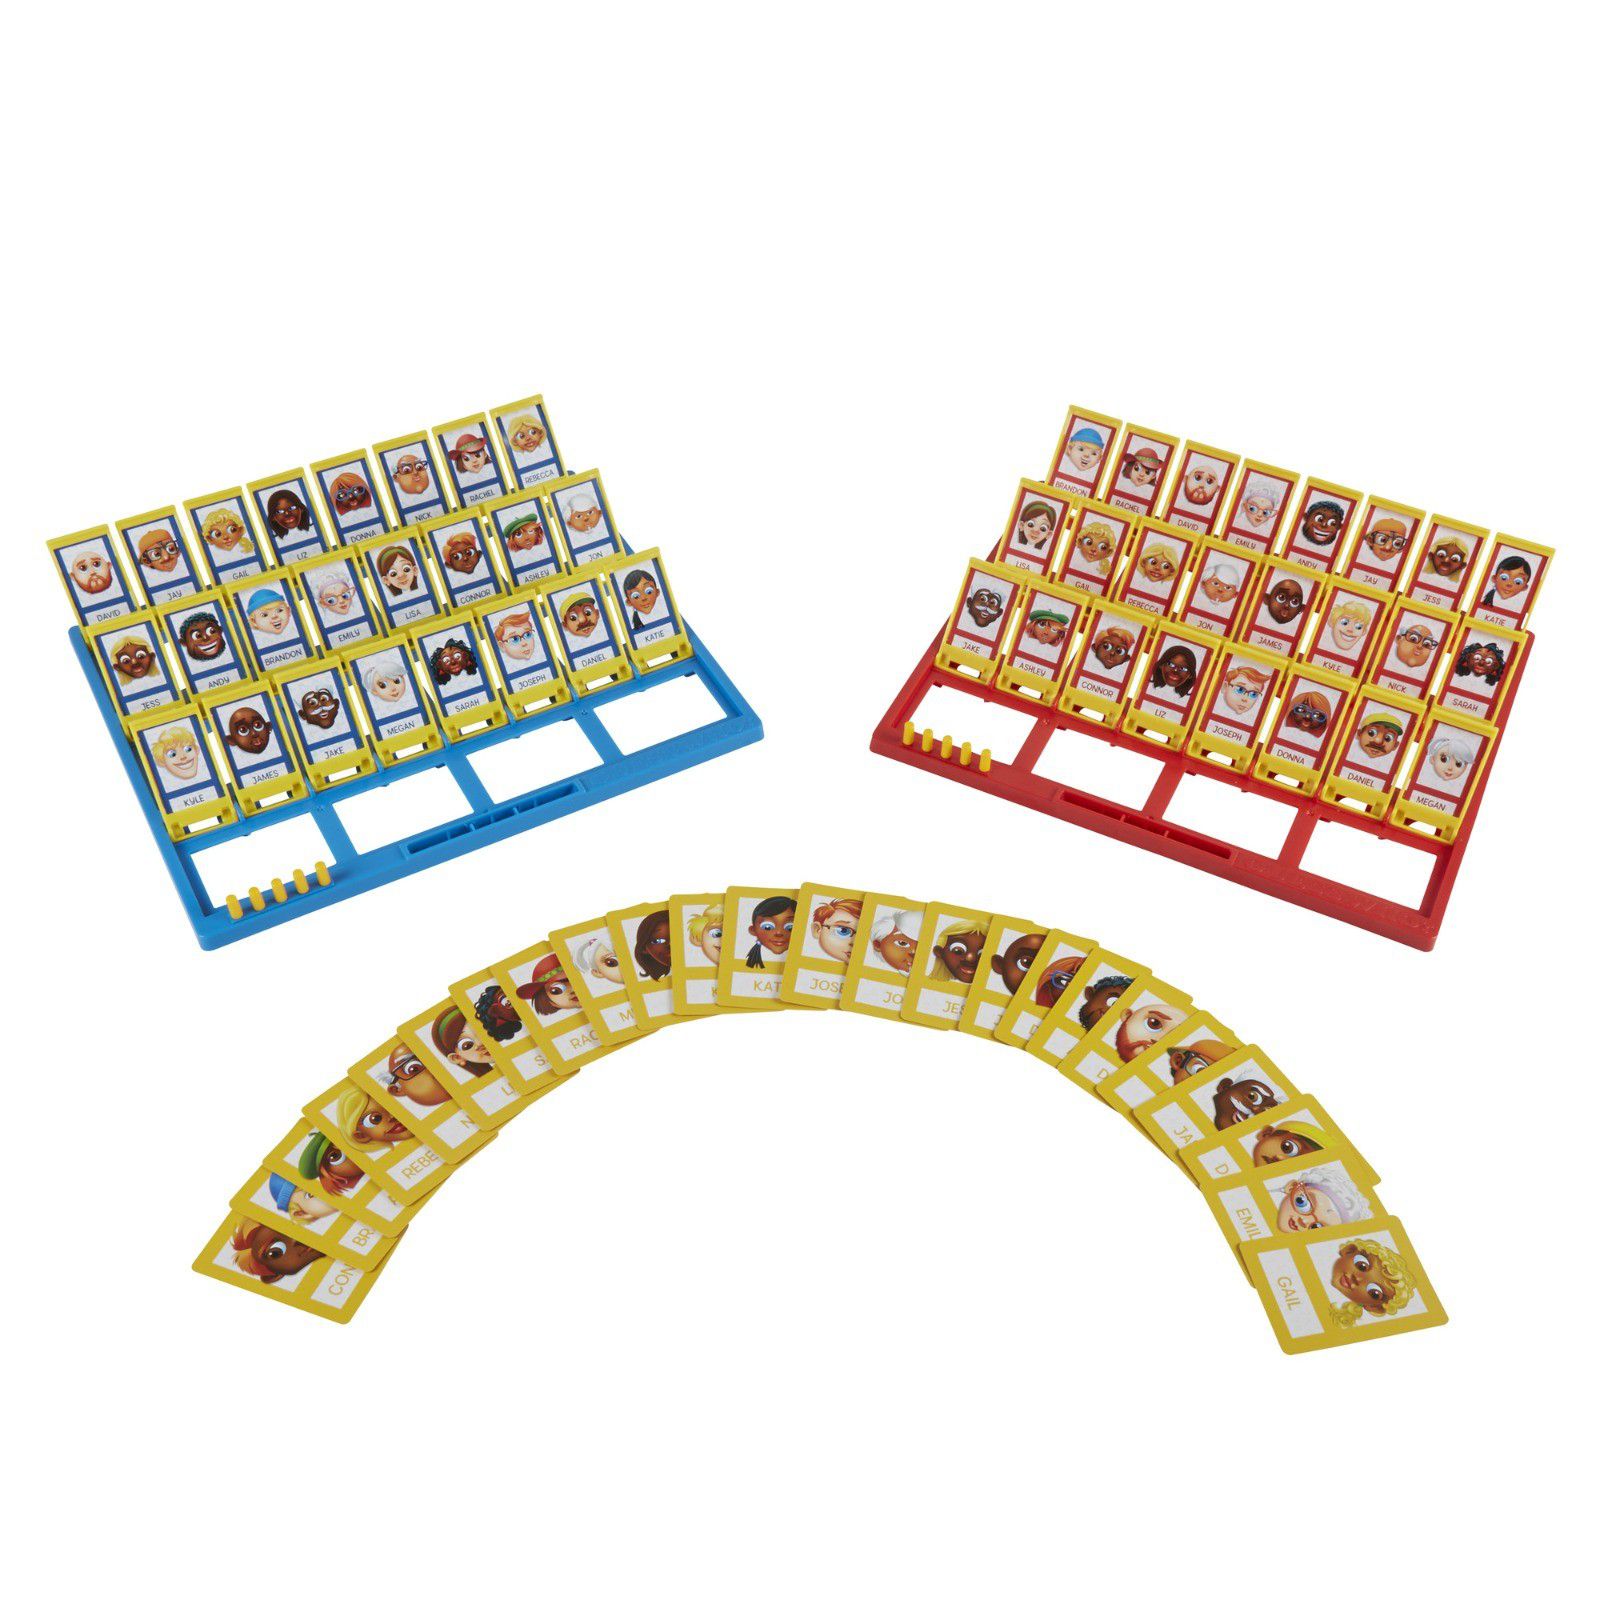 Classic Guess Who? - Original Guessing Game, Ages 6 and up